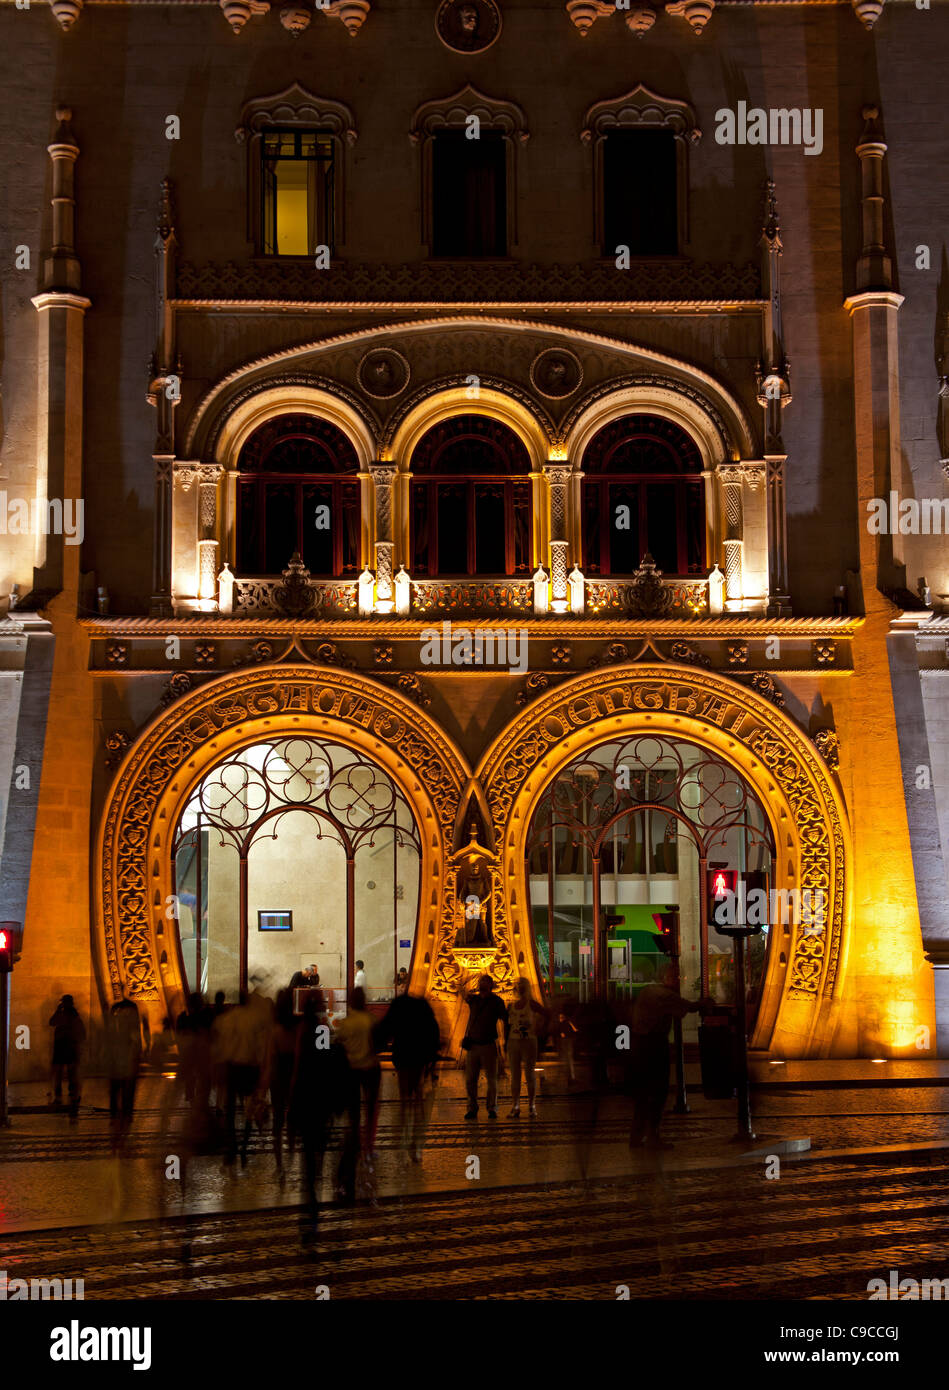 Rossio Station neo-Manueline horshoe shaped entrance, built in 1886-7 by Jose Luis Monteiro, Lisbon Portugal Stock Photo